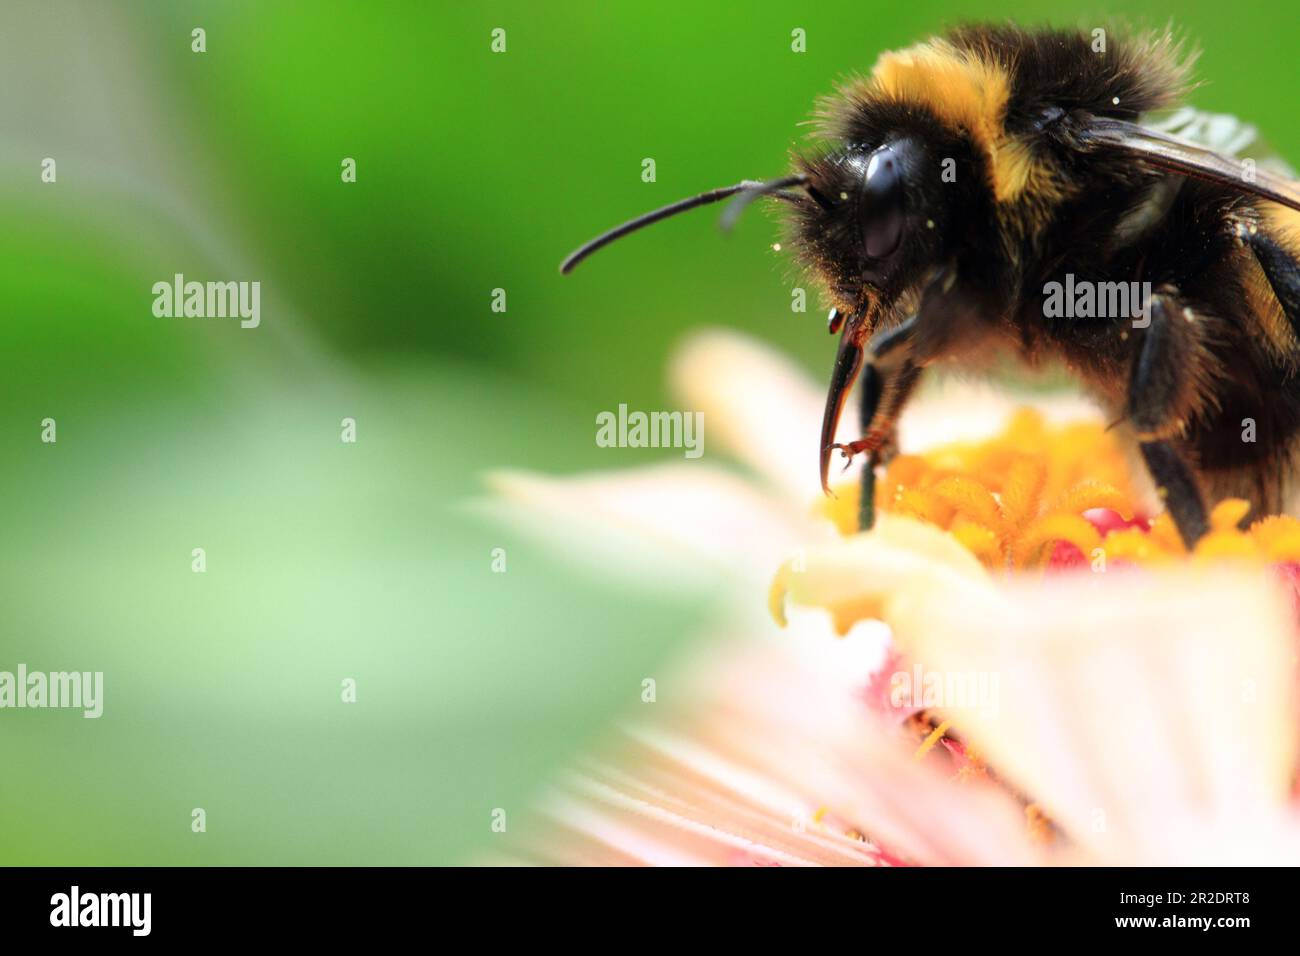 How the humblebee became the bumblebee, Insects